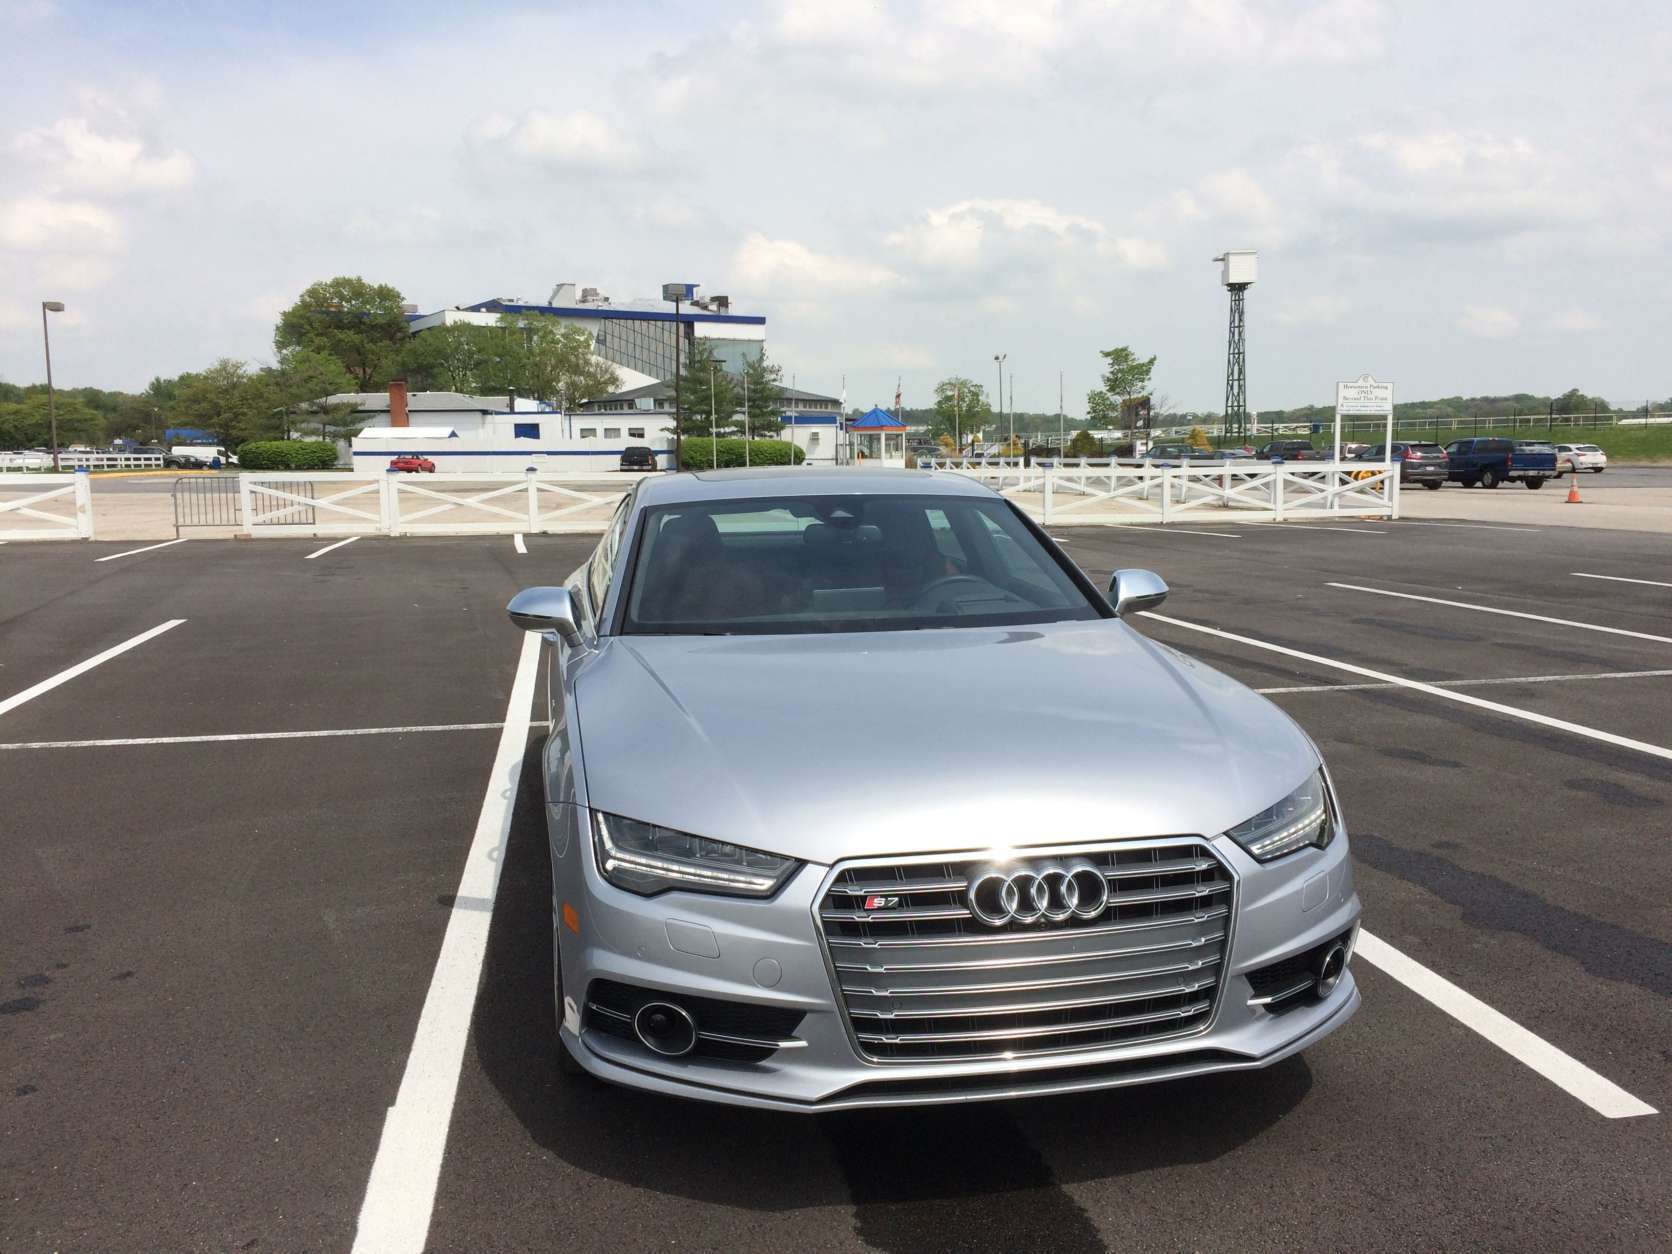 Parris says the Audi S7 is an all-around car that's comfortable for a daily driver and that carries things that a normal sedan couldn't. (WTOP/Mike Parris)